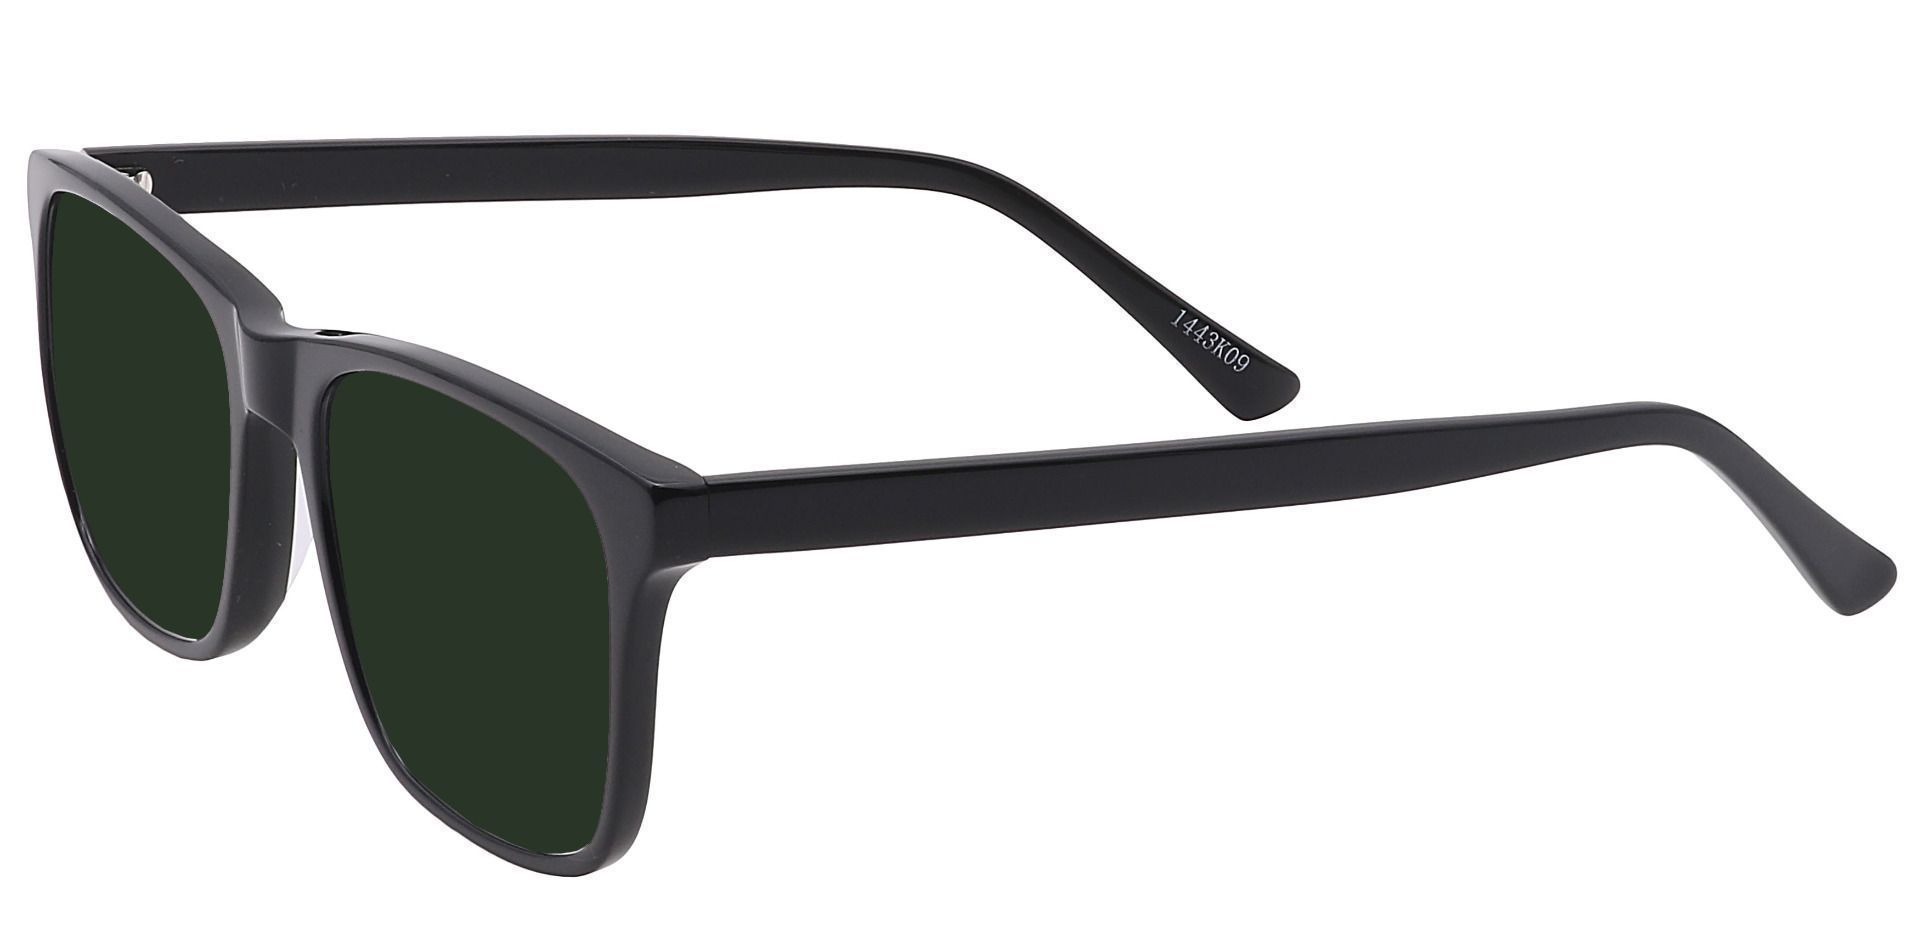 Cantina Square Non-Rx Sunglasses - Black Frame With Green Lenses